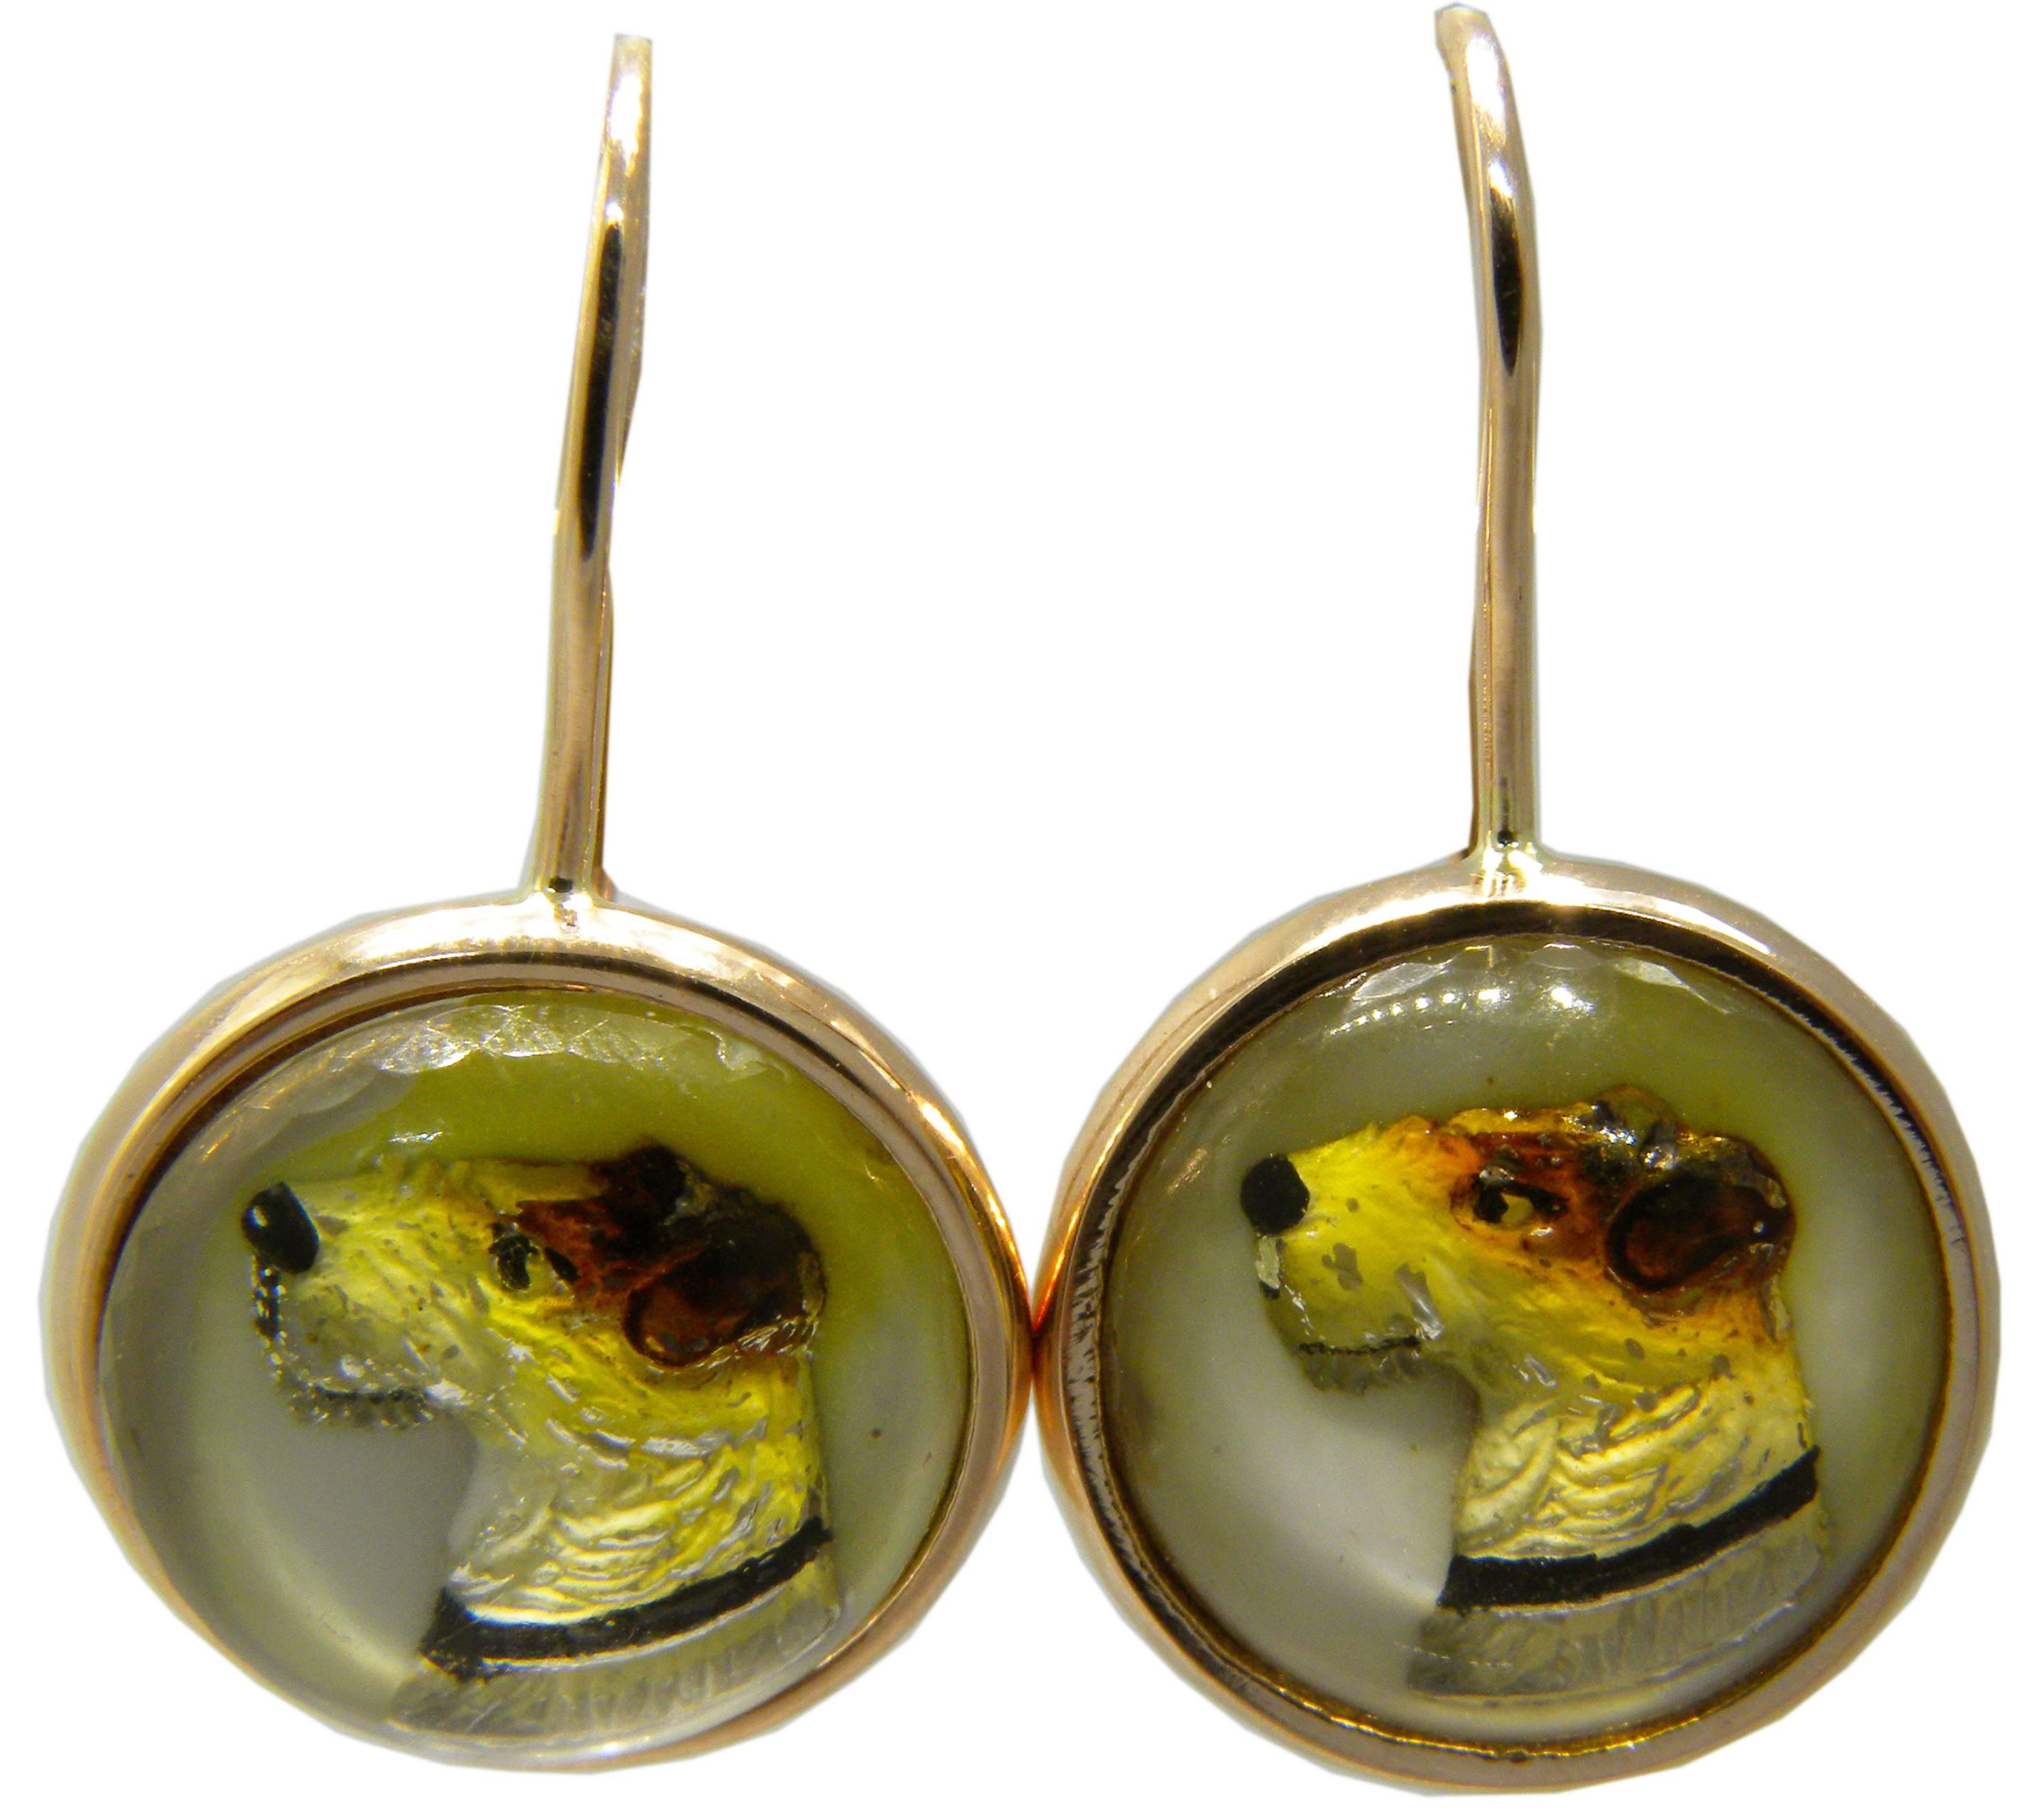 Essex or Reverse Painting Under Crystal earrings featuring a Fox Terrier image, 9k rose gold setting.
During the 50's Giovanni Berca used to collect Essex Glassex and create unique pieces of jewelry for his family and friends.
We still own some